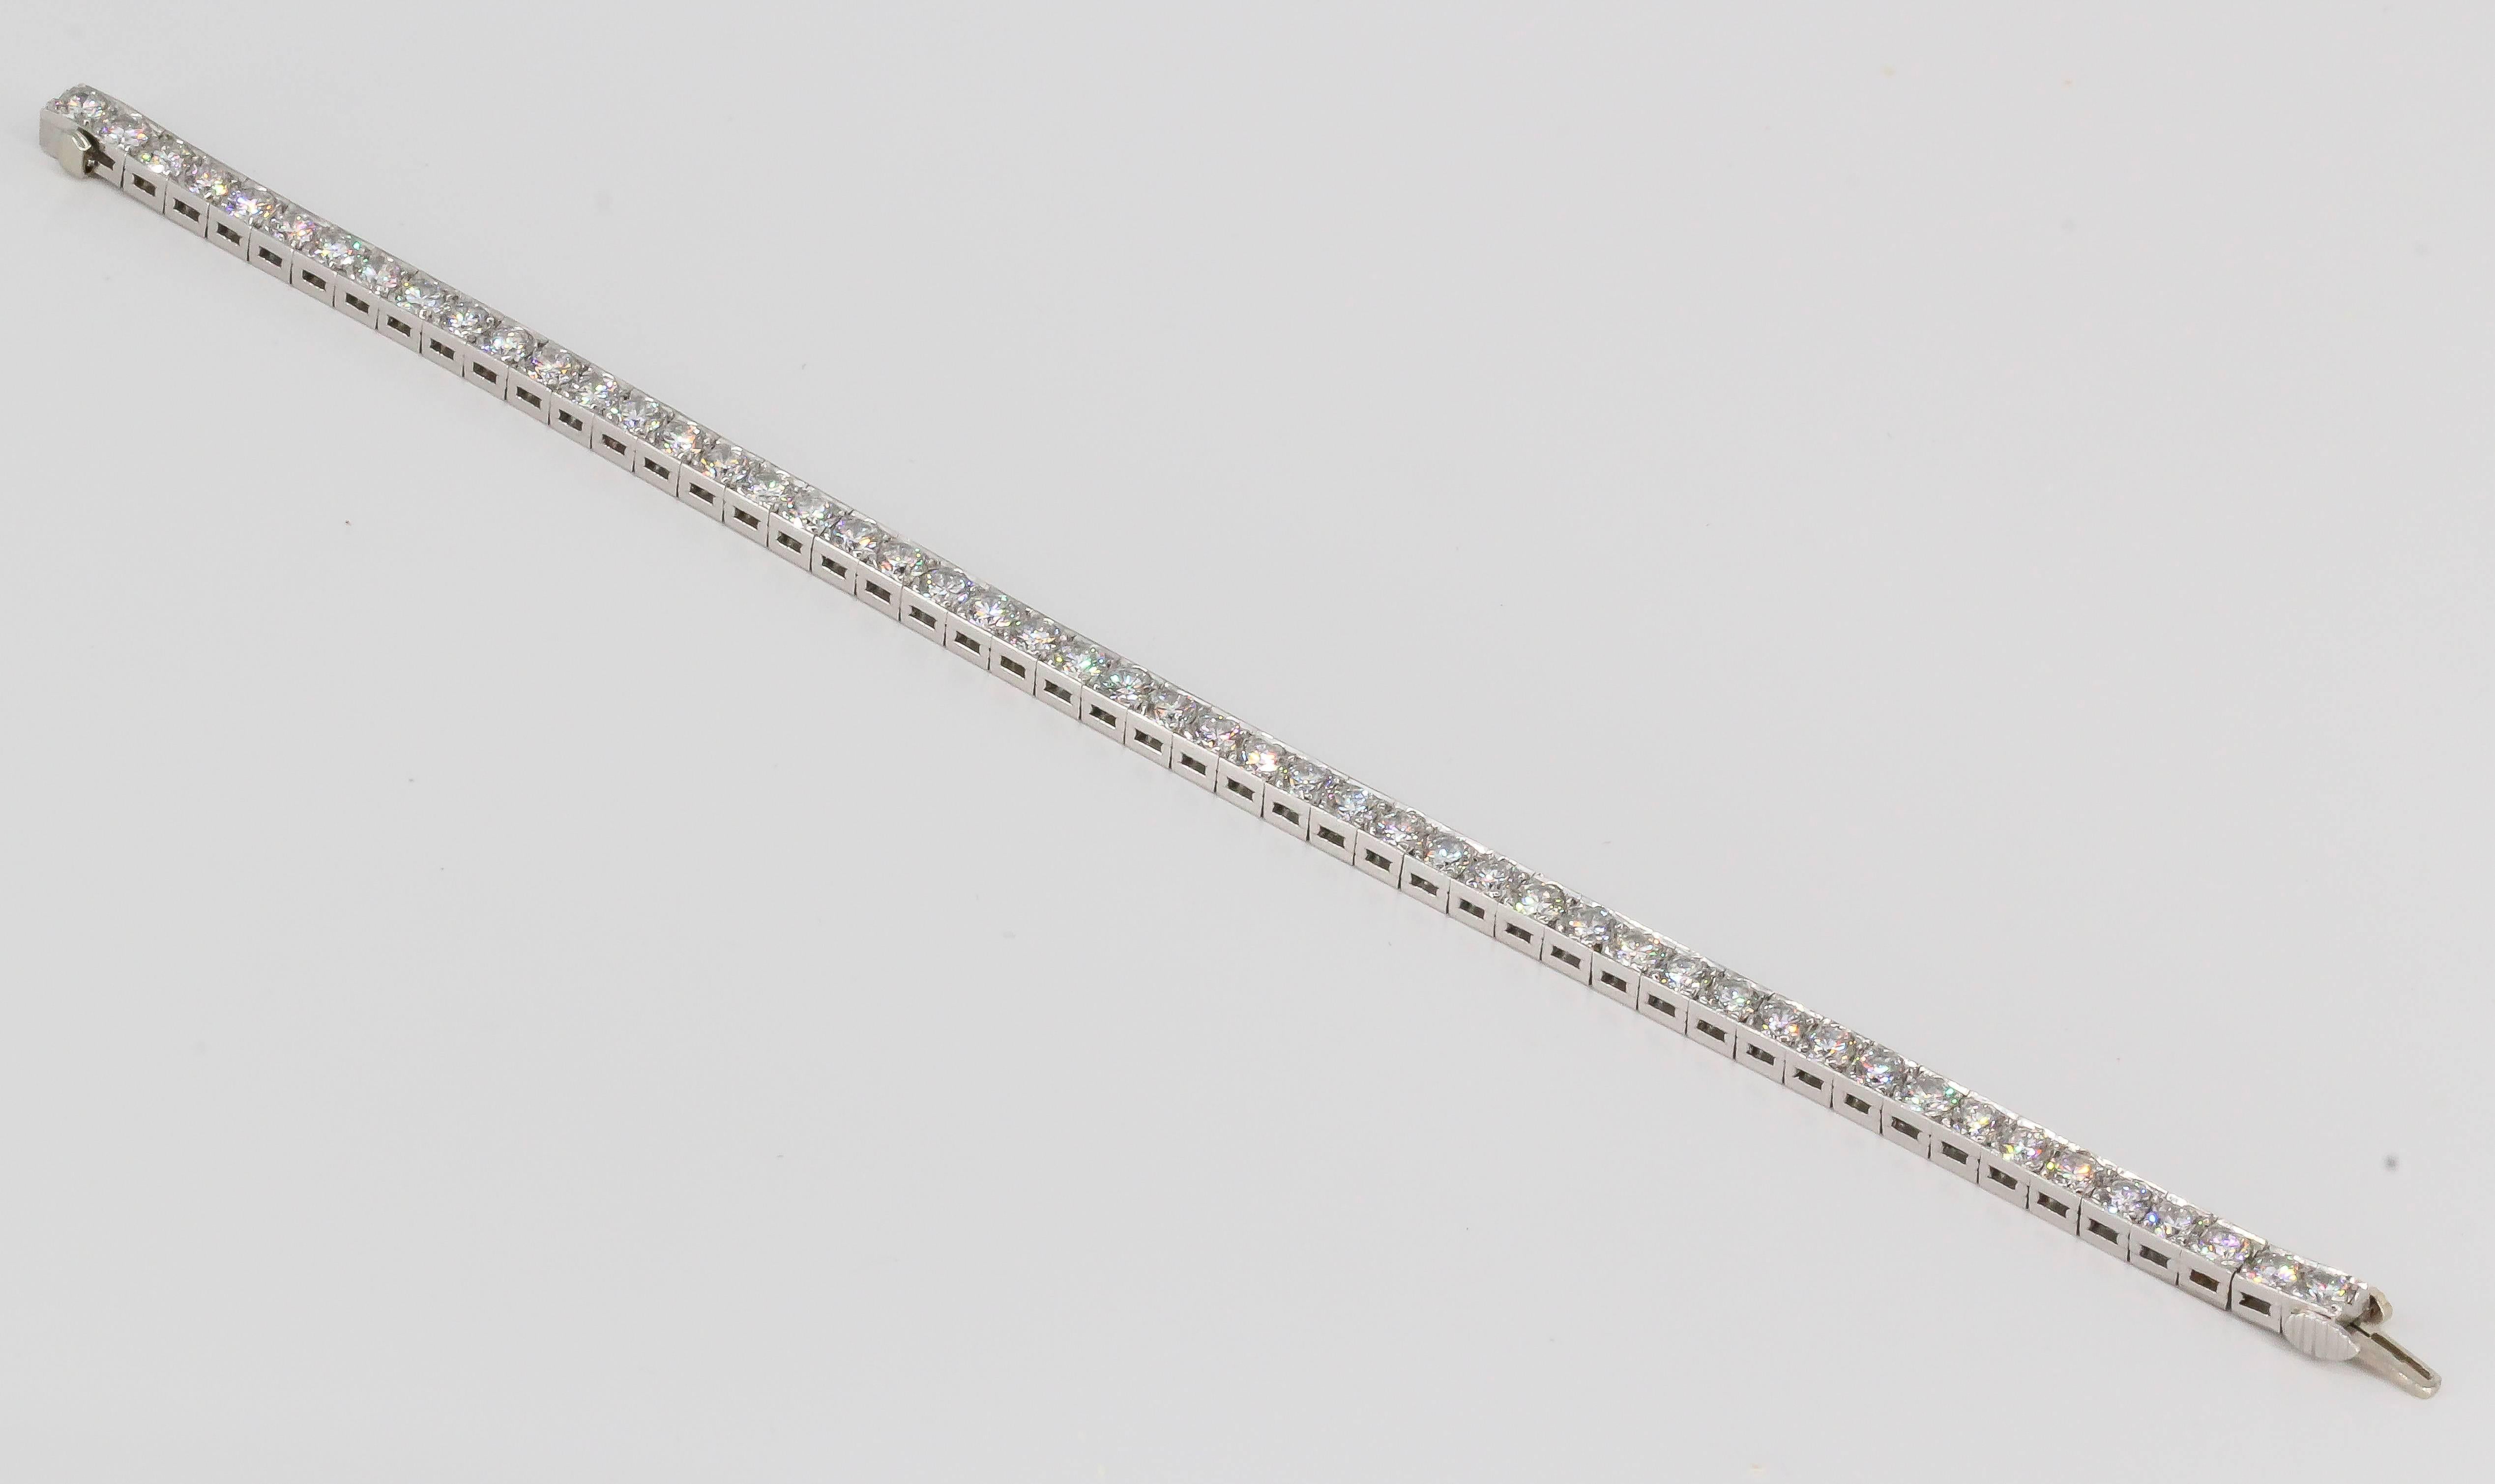 Superb diamond and platinum line bracelet by J. E. Caldwell, circa 1920s-30s. Features high grade round brilliant cut diamonds, approx. 7-8 cts total weight. Exceptional make and quality featuring very little metal, yet a simple understated